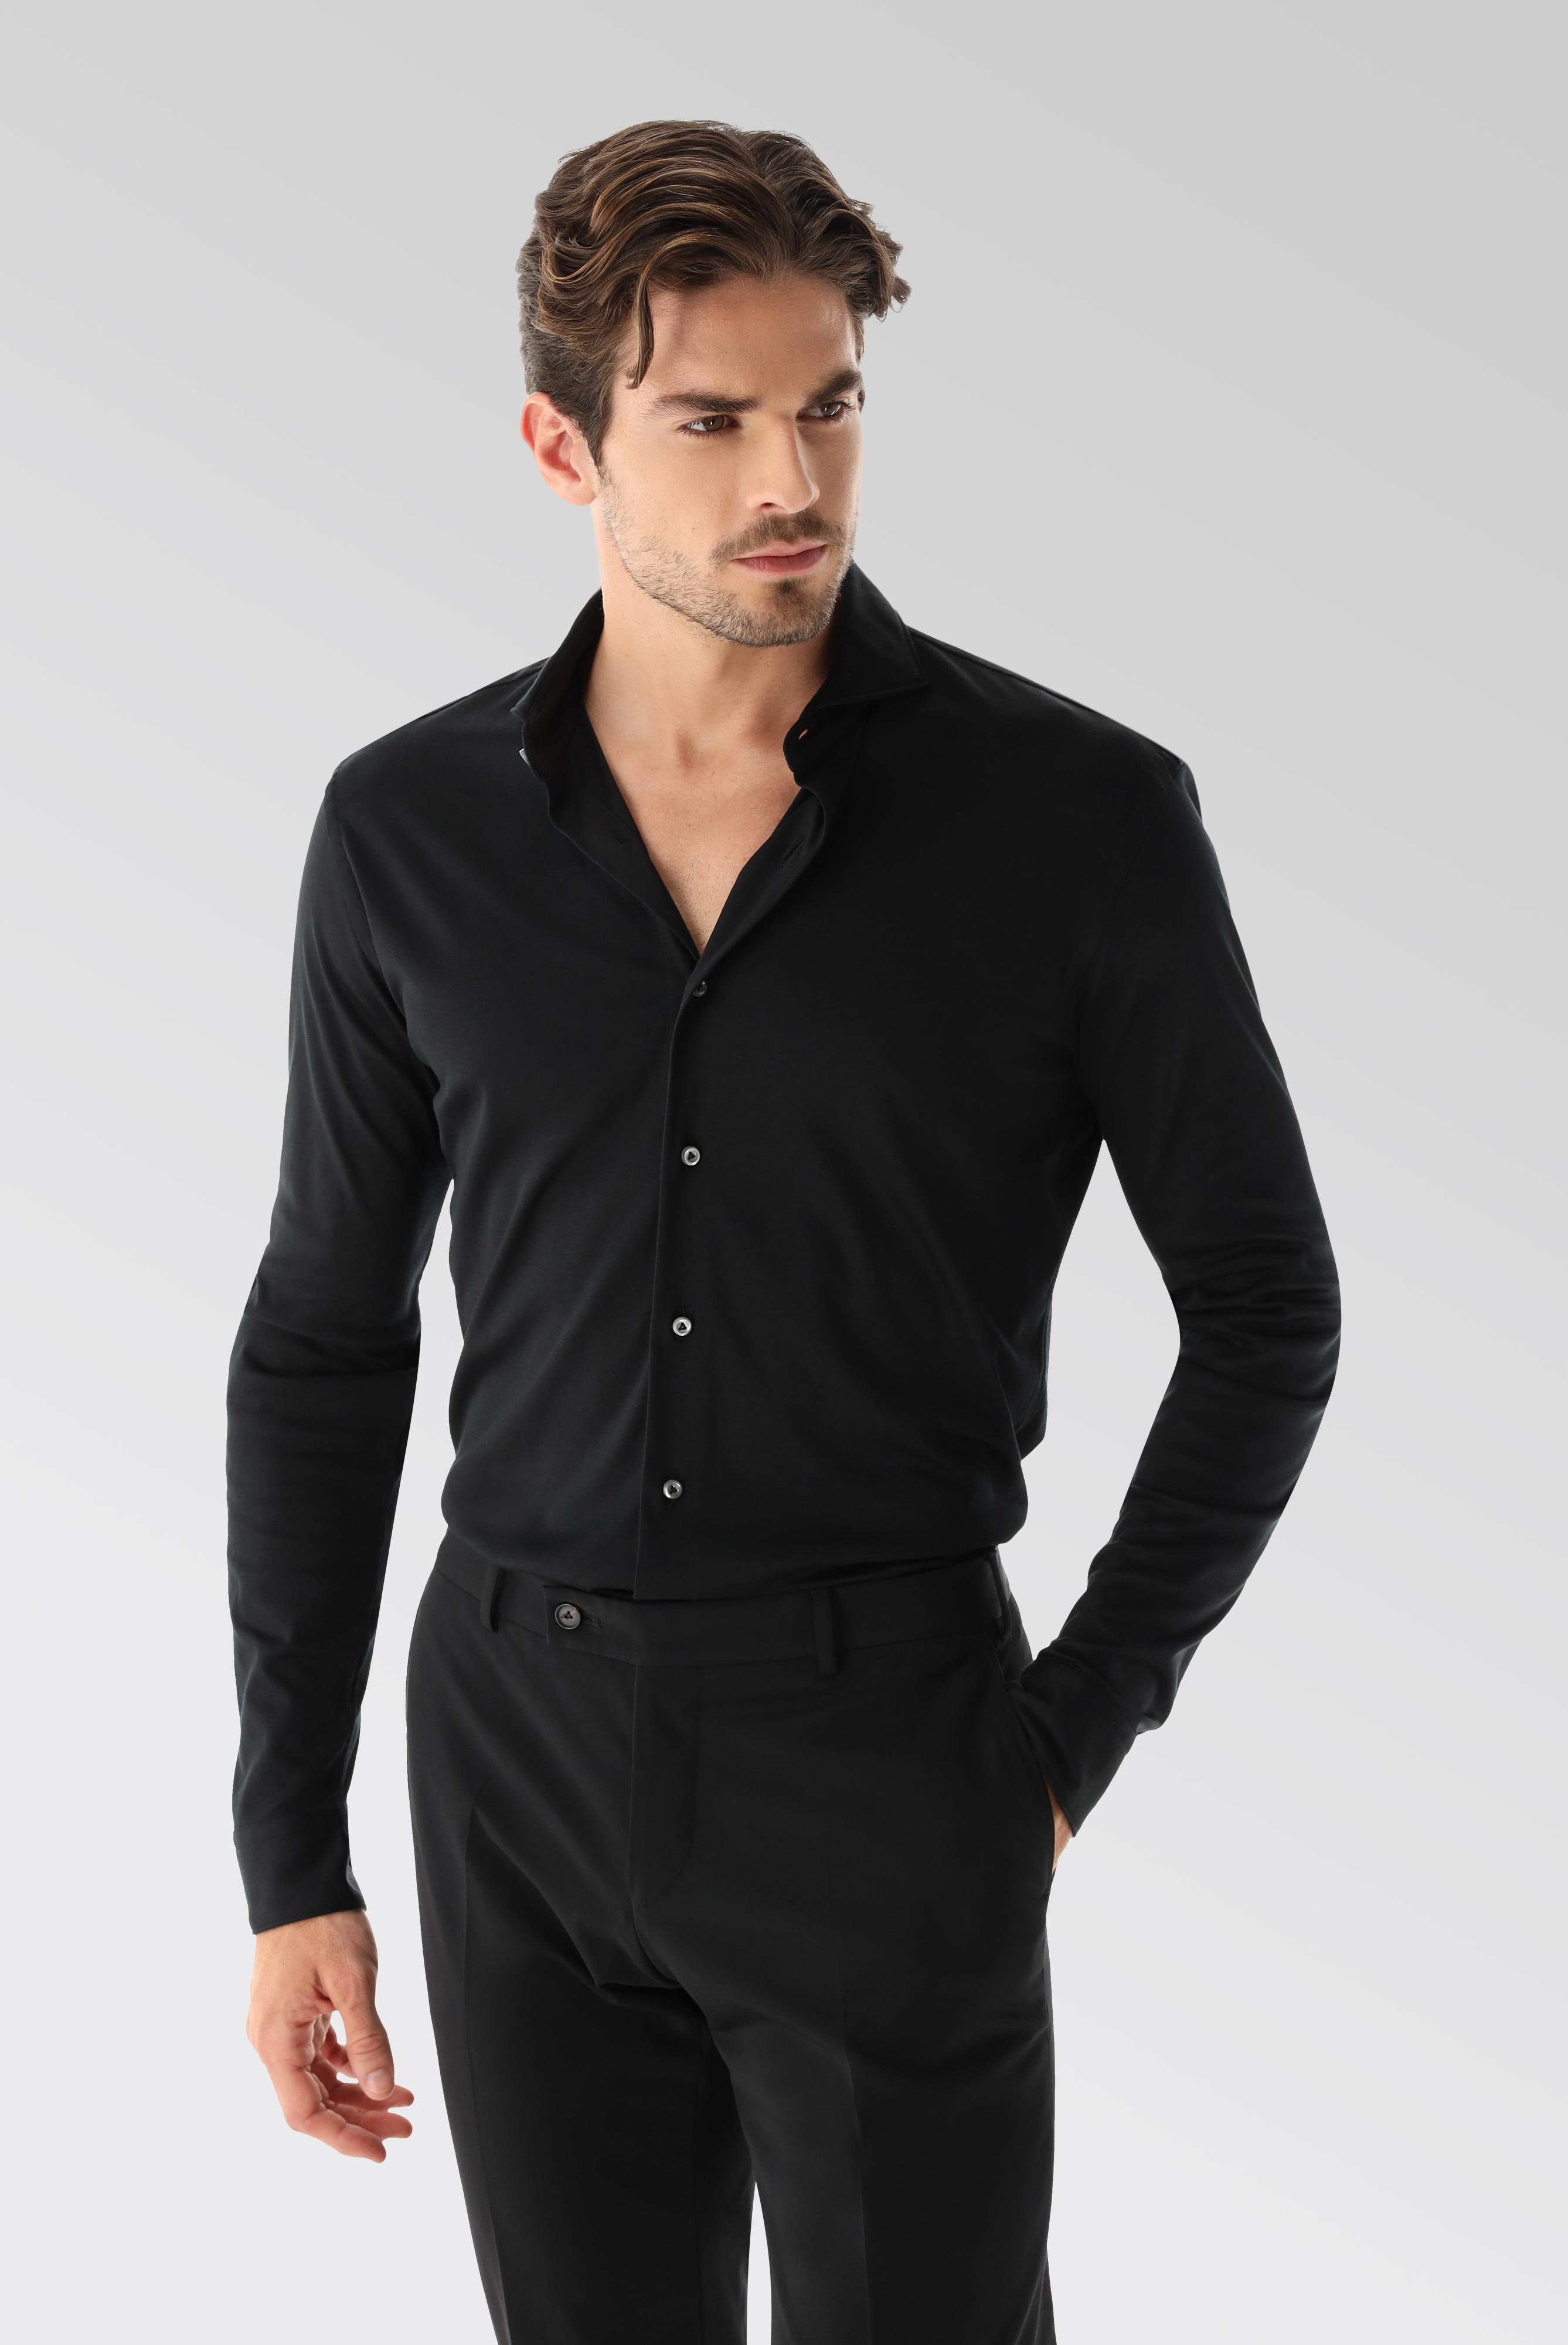 Easy Iron Shirts+Swiss Cotton Jersey Shirt Tailor Fit+20.1683.UC.180031.099.X4L